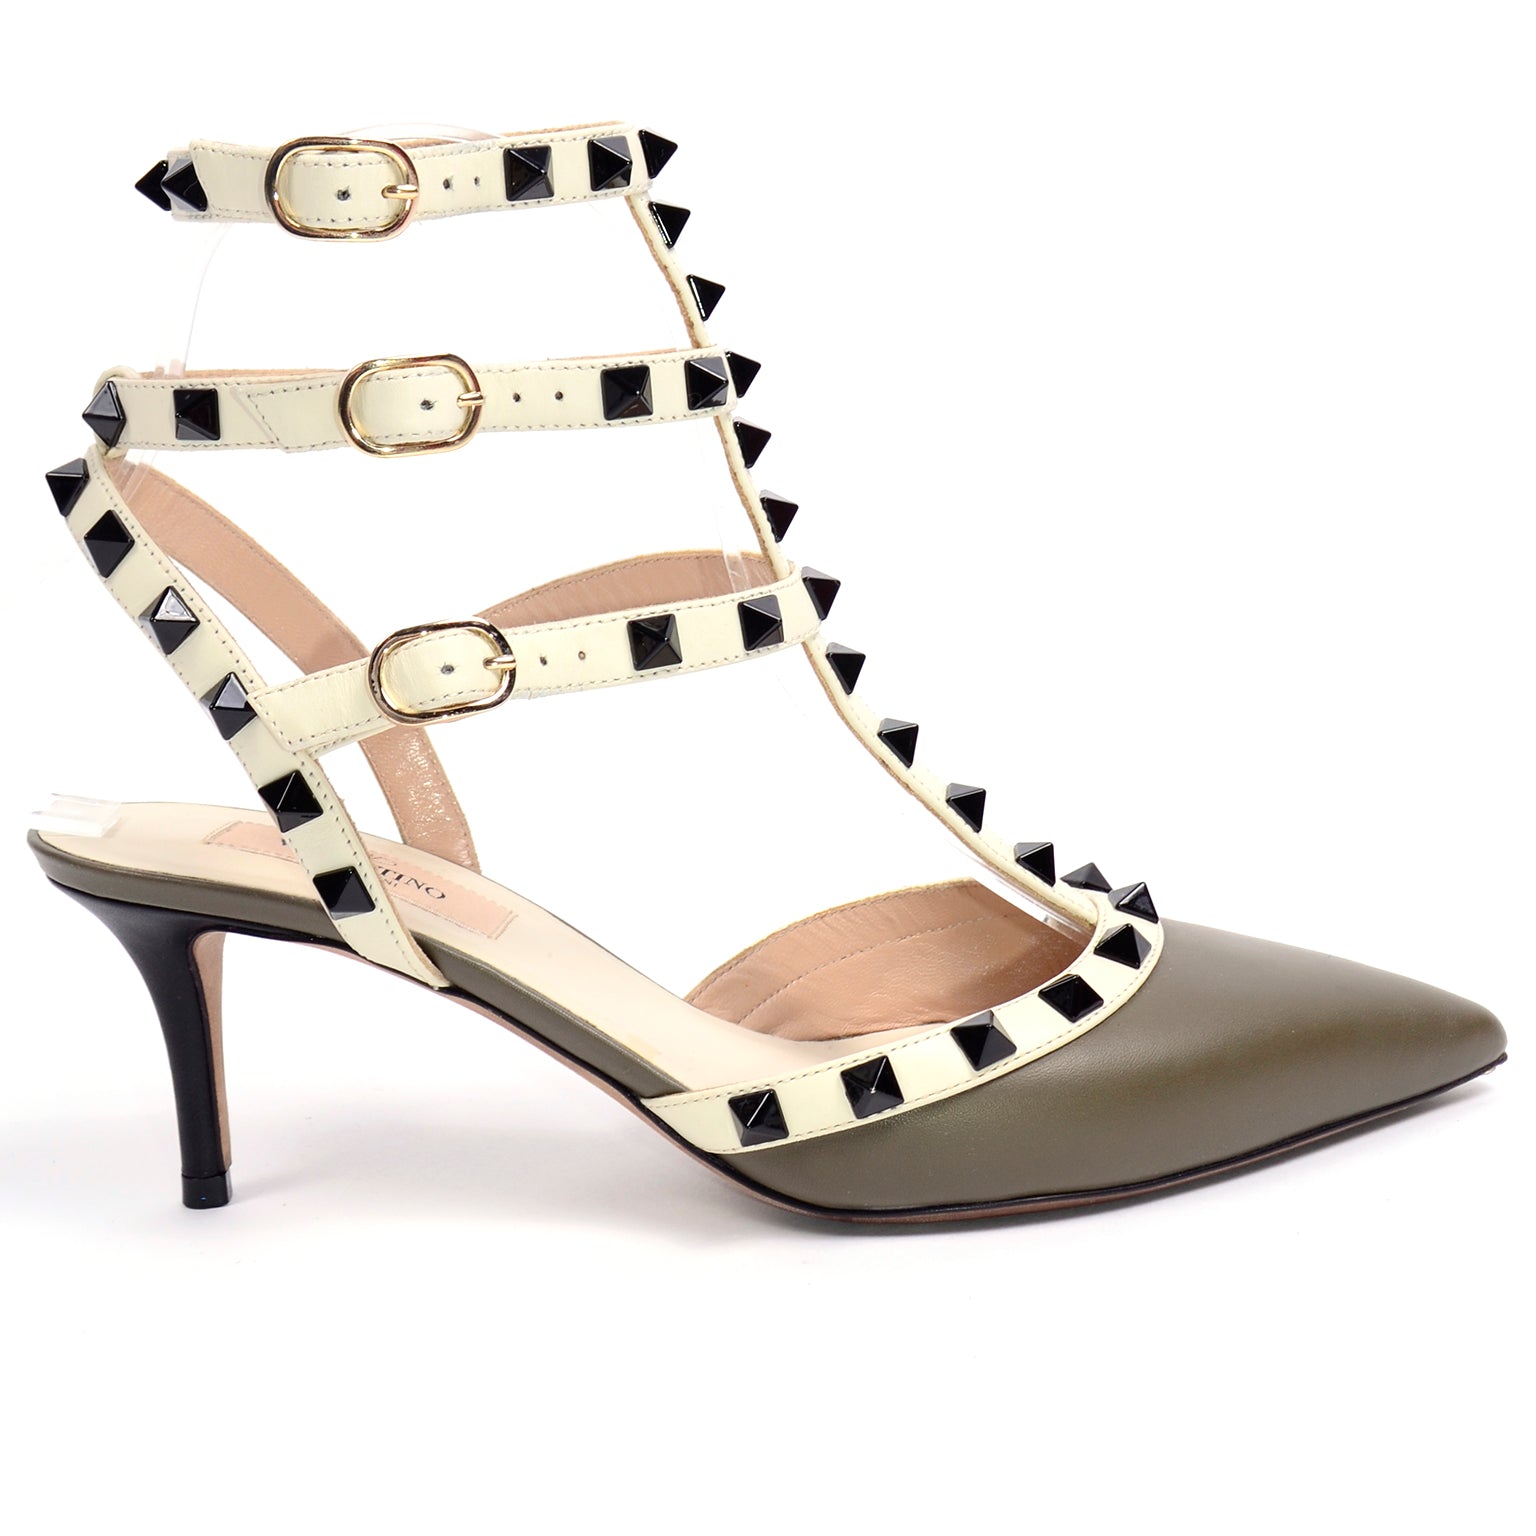 Green Valentino Rockstud Shoes w Cage Triple Ankle Straps & Low